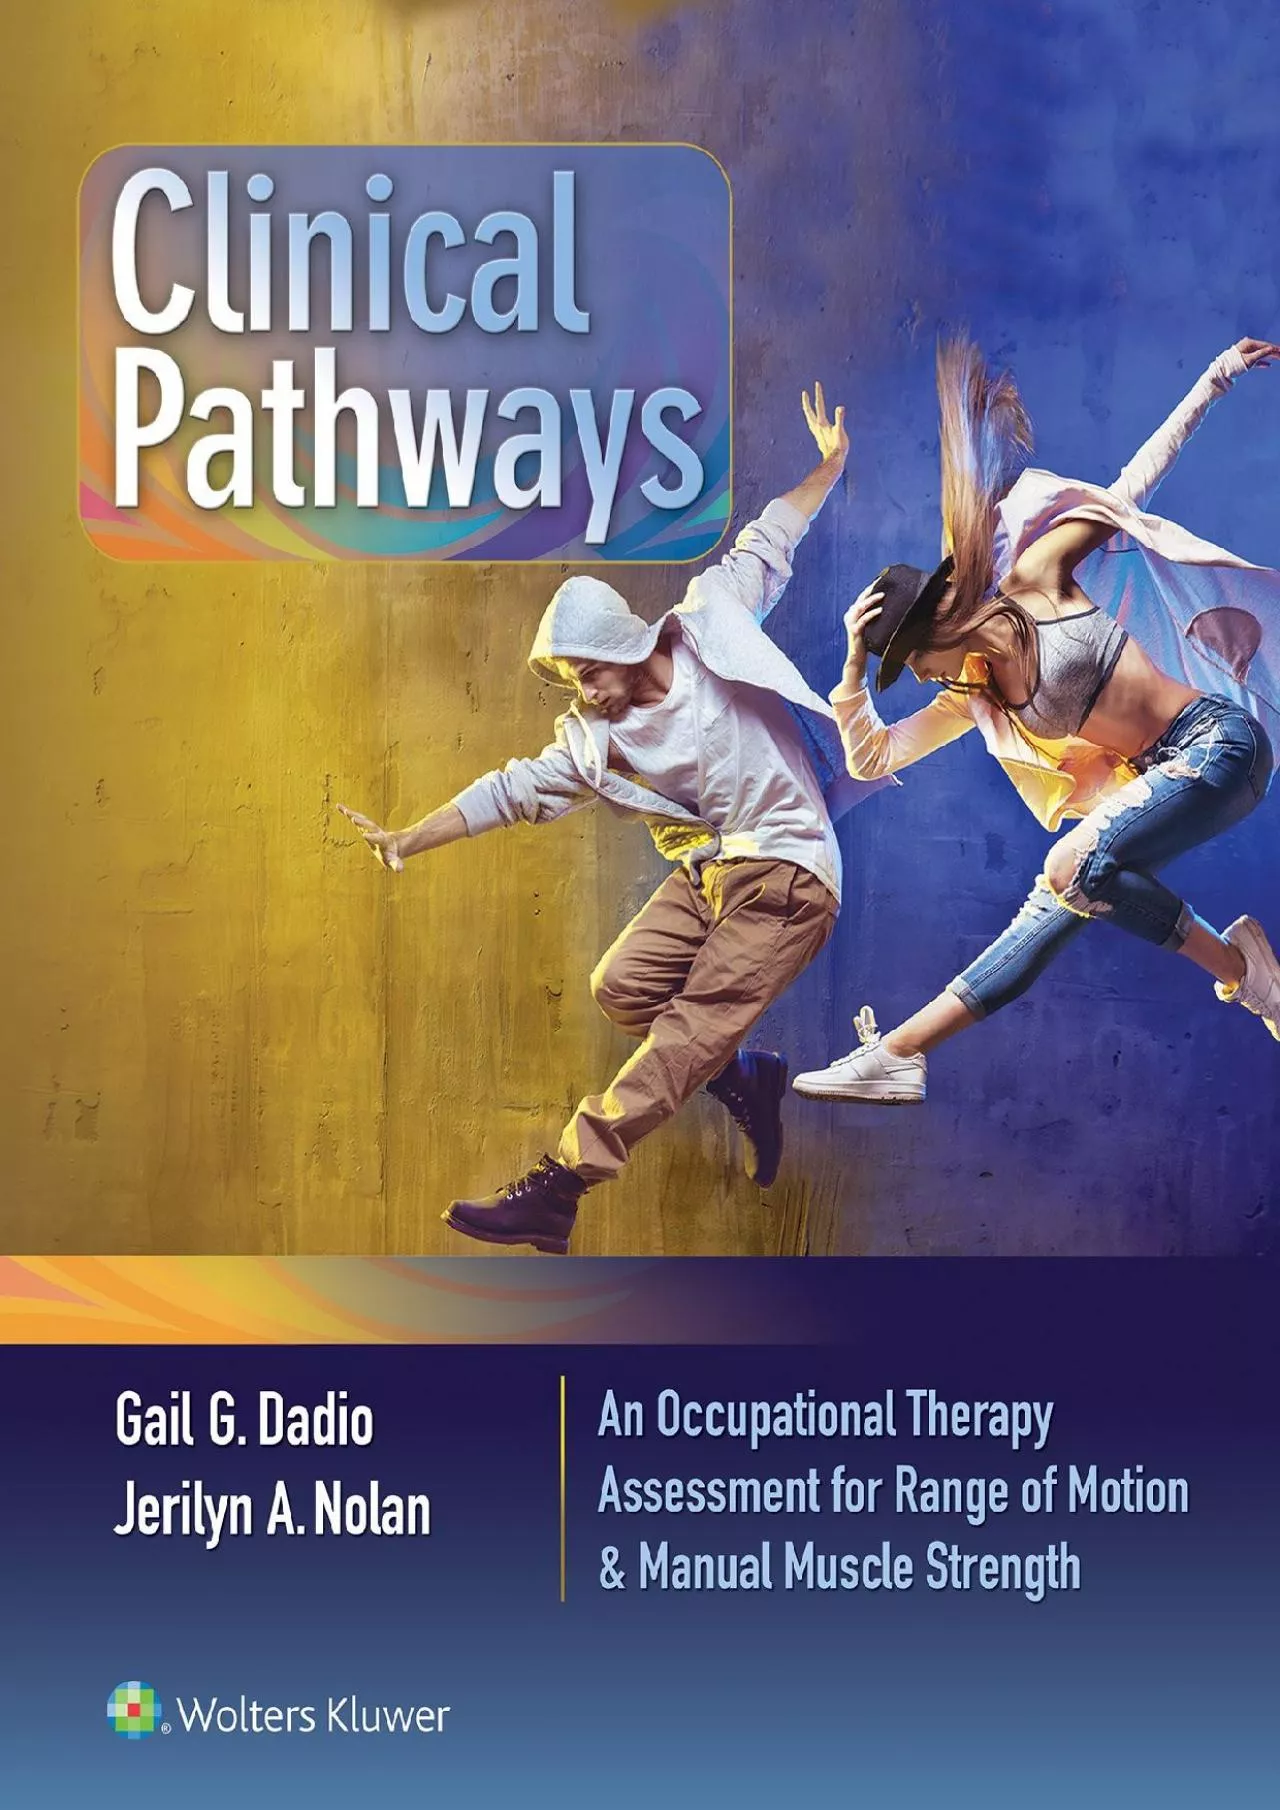 (BOOS)-Clinical Pathways: An Occupational Therapy Assessment for Range of Motion & Manual